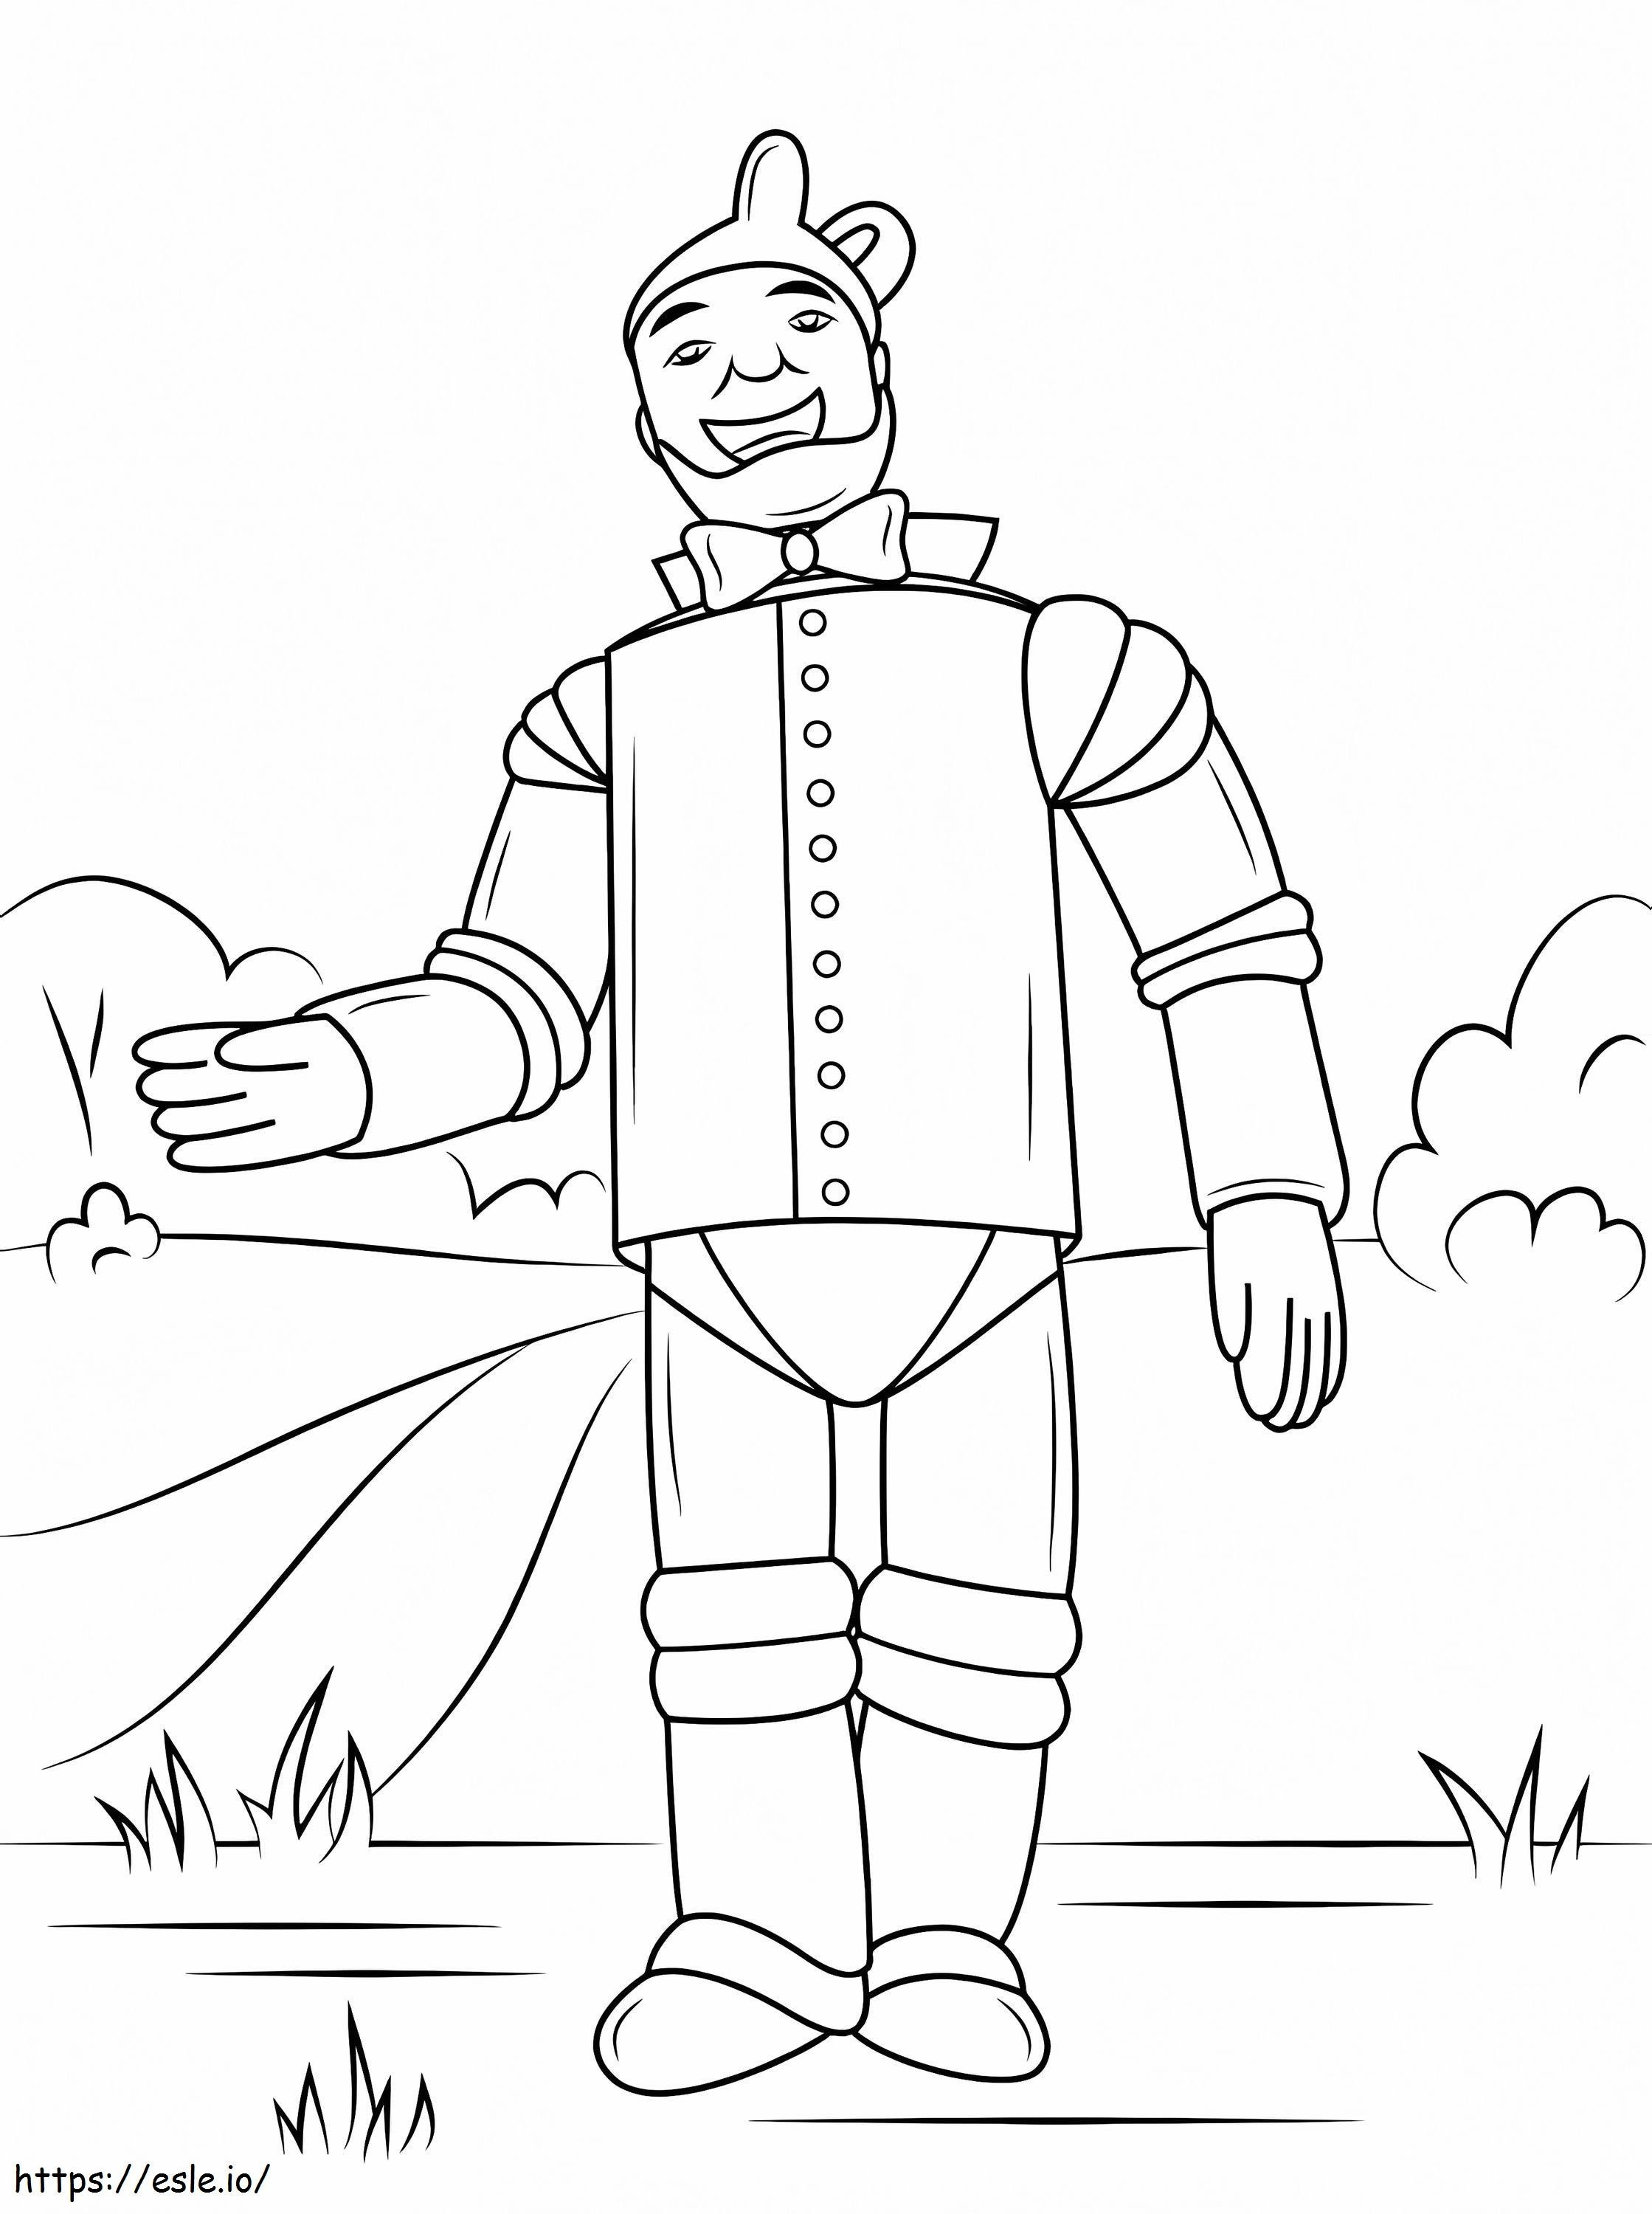 The Tin Man From The Wizard Of Oz coloring page